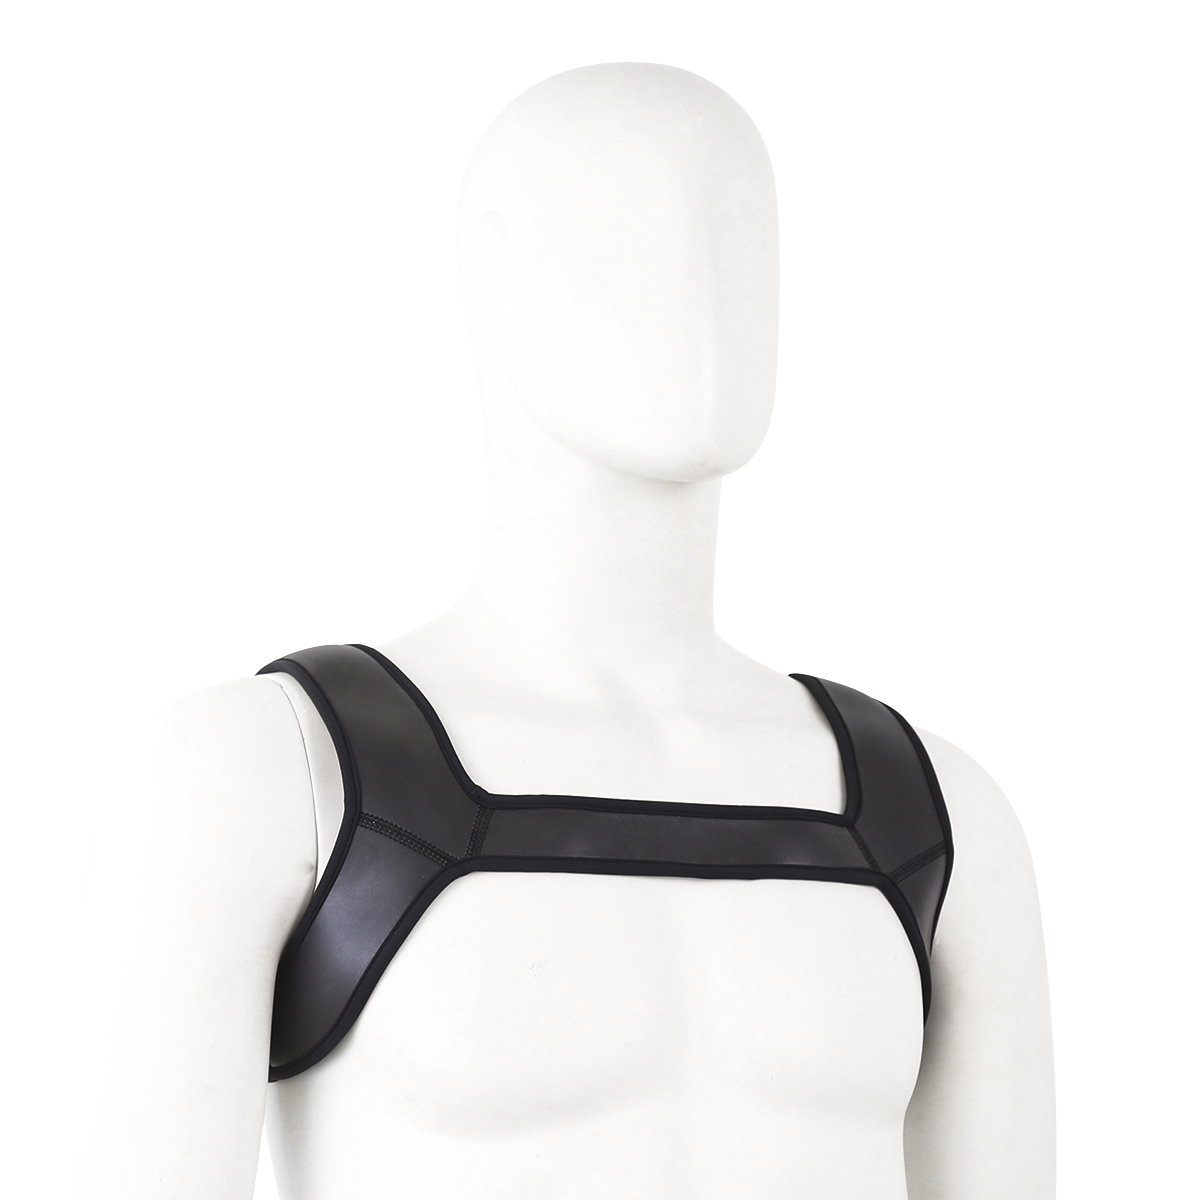 Harness Sport Muscle Protector L